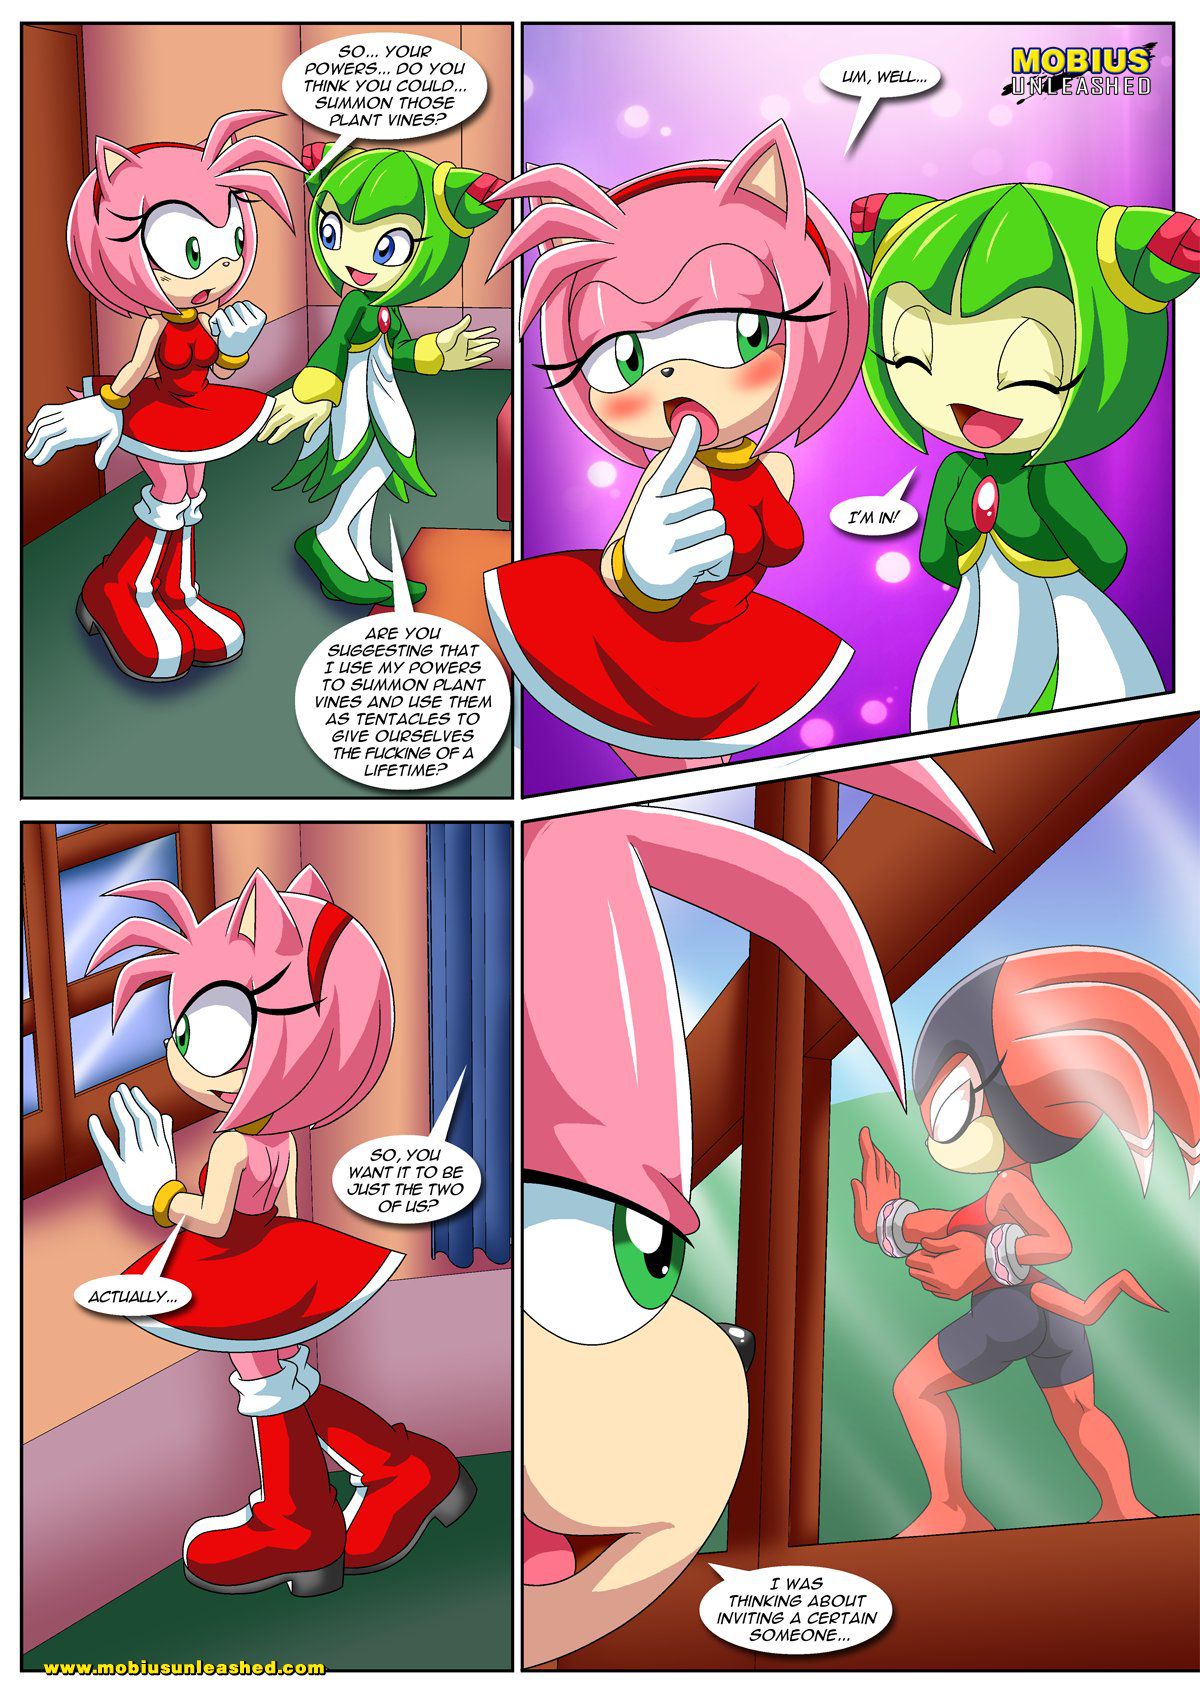 [Palcomix] Team GF's Tentacled Tale (Sonic The Hedgehog) [Ongoing] 6